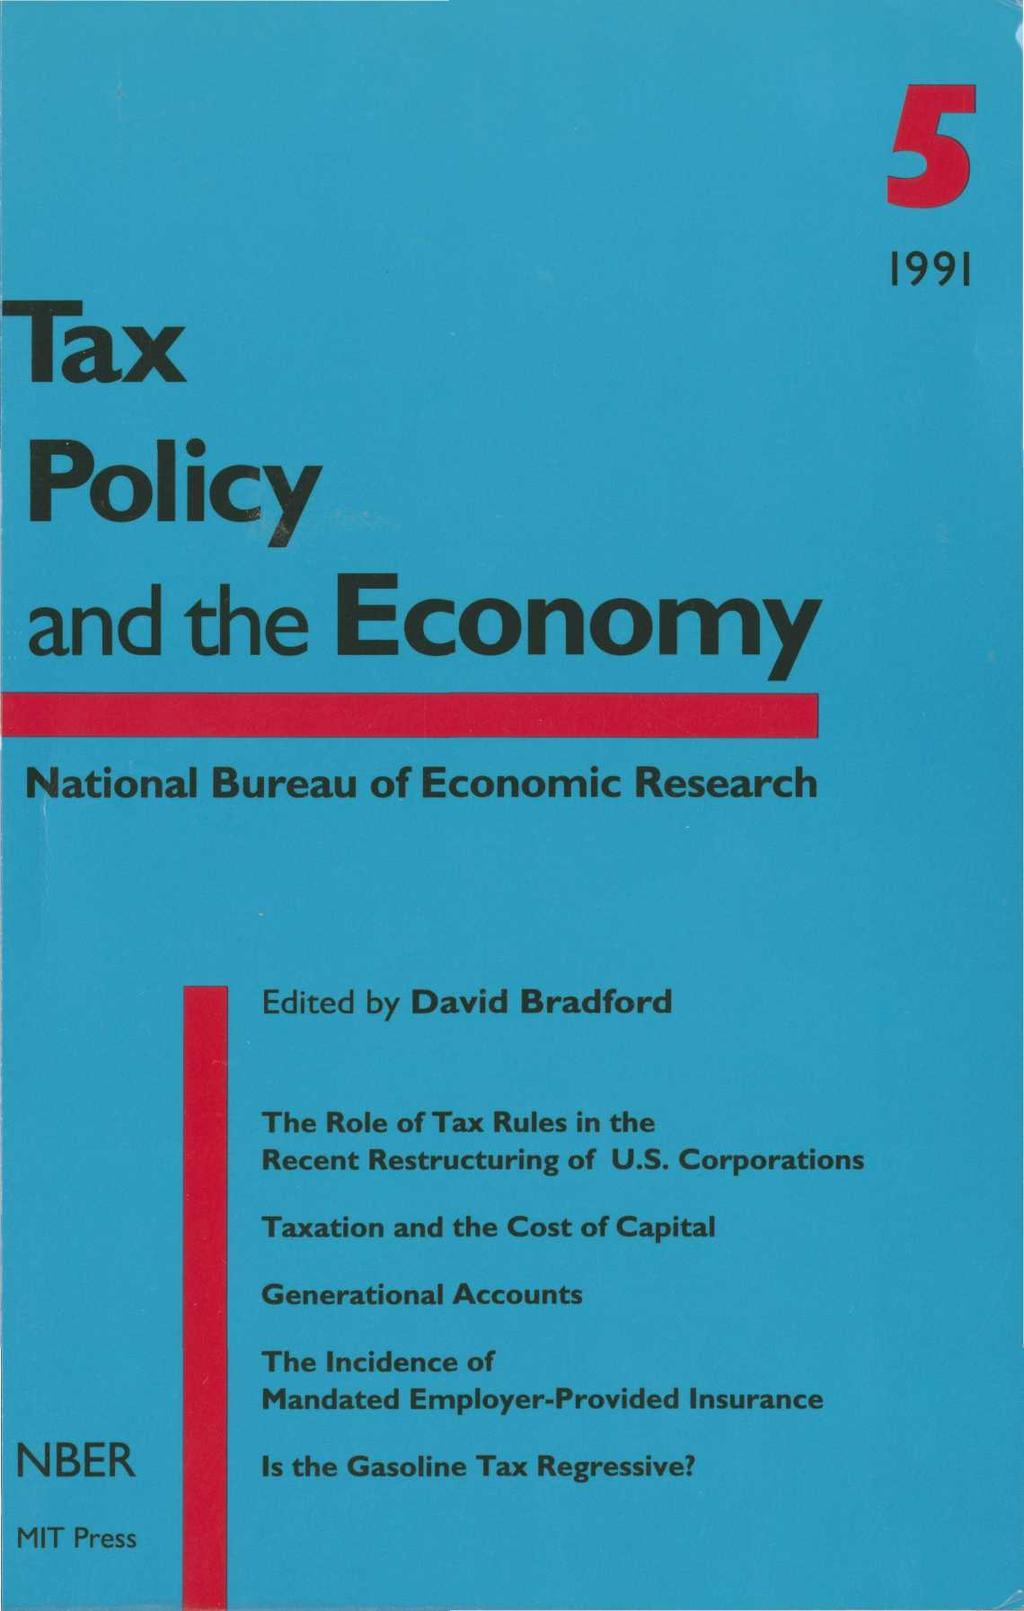 lax 5 1991 Policy andthe Economy National Bureau of Economic Research Edited by David Bradford The Role of Tax Rules in the Recent Restructuring of U.S.